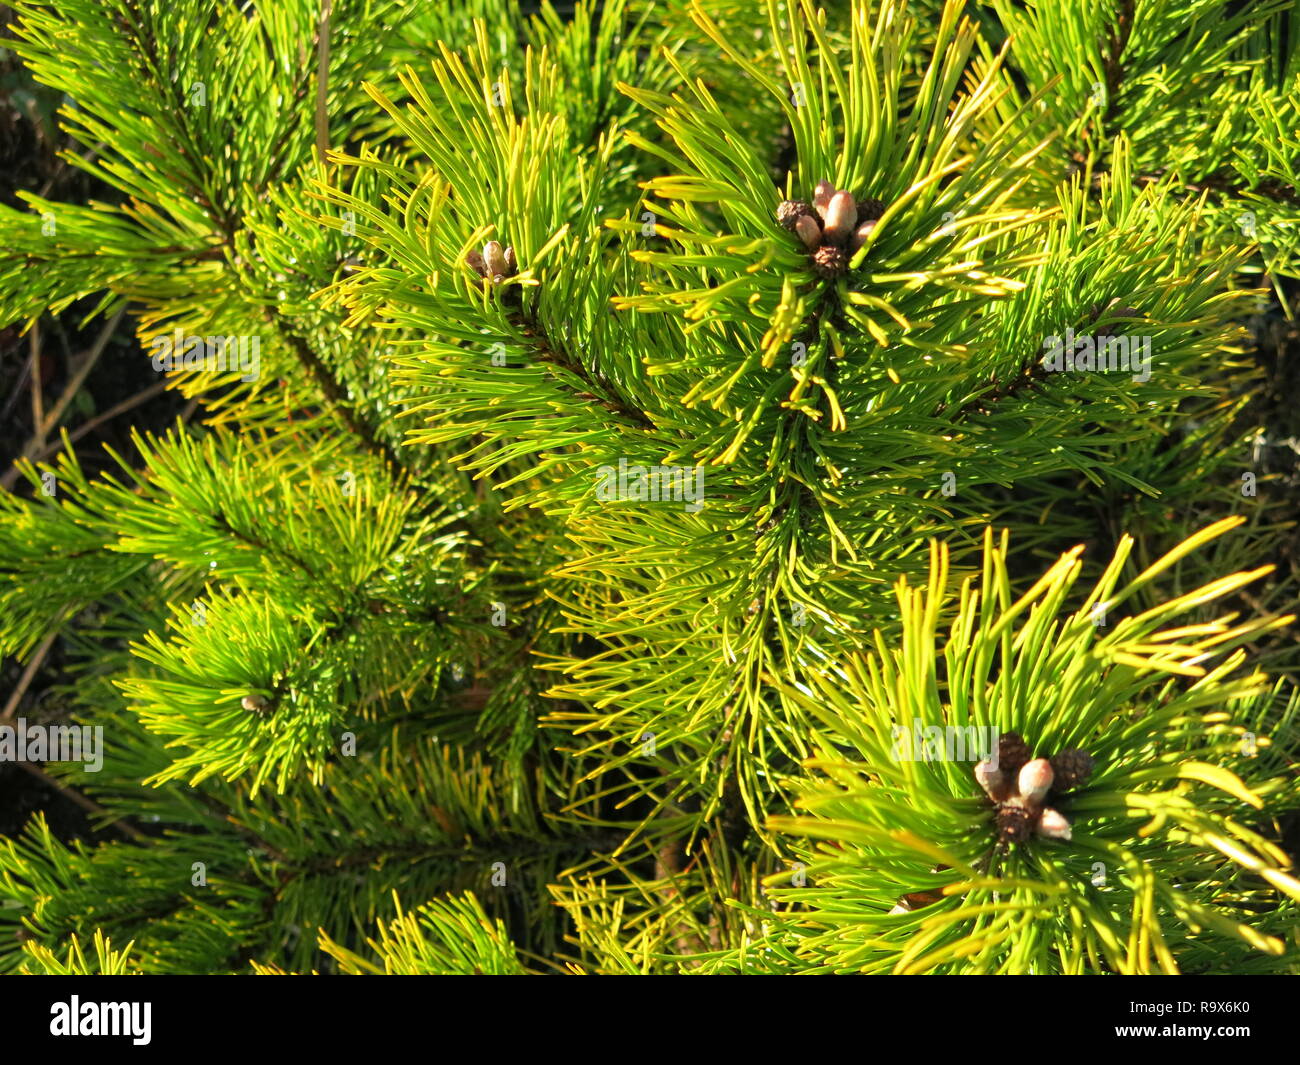 Photo in close-up looking down onto a dwarf mountain pine, Pinus Mugo, in the border of a Scottish garden in winter; pine needles and cones. Stock Photo